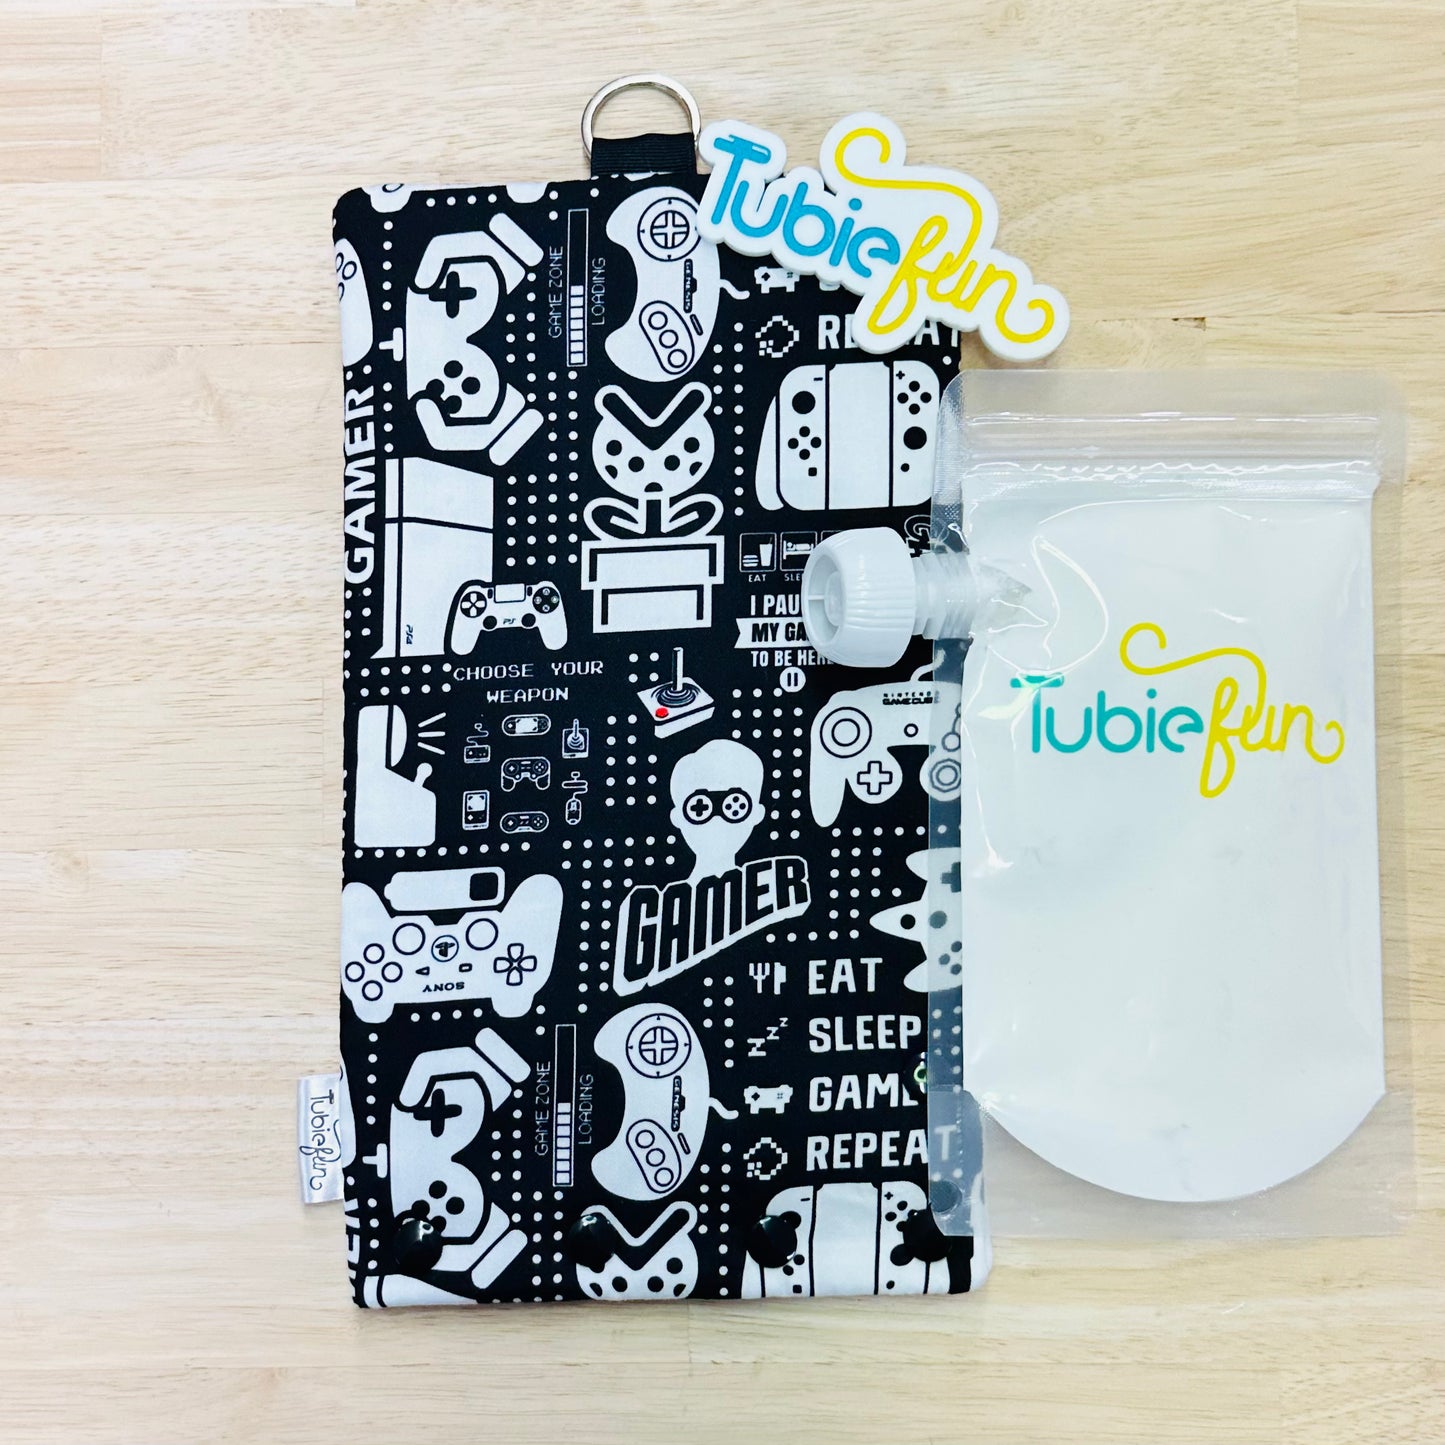 NEW Insulated Milk Bag Suitable for Tubie Fun 500ml Reusable Pouches - Gamer